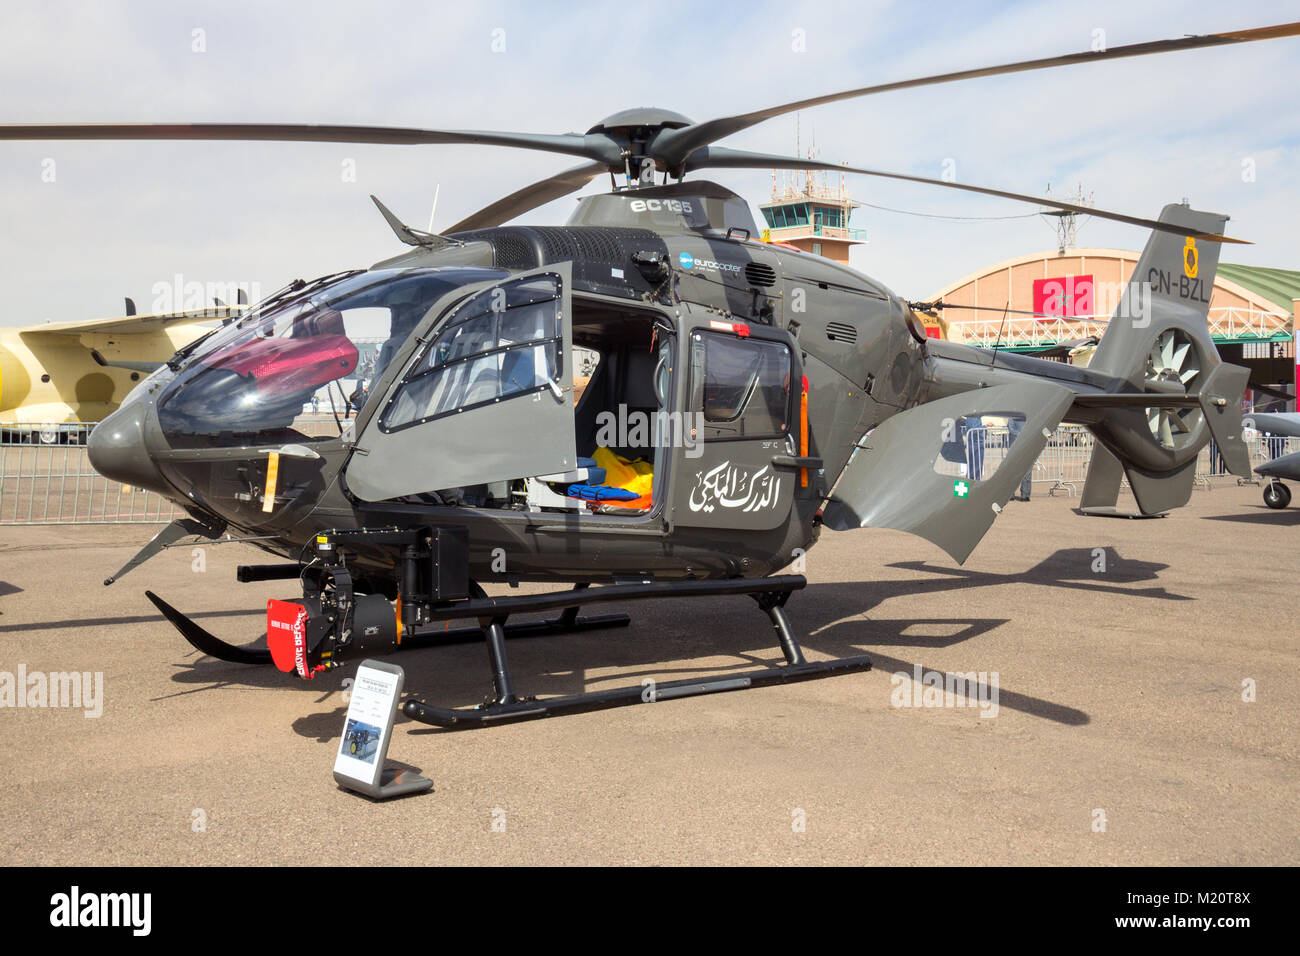 MARRAKECH, MOROCCO - APR 28, 2016: Royal Moroccan Gendarmerie (Military Police) Eurocopter EC-135 helicopter on display at the Marrakech Air Show. Stock Photo